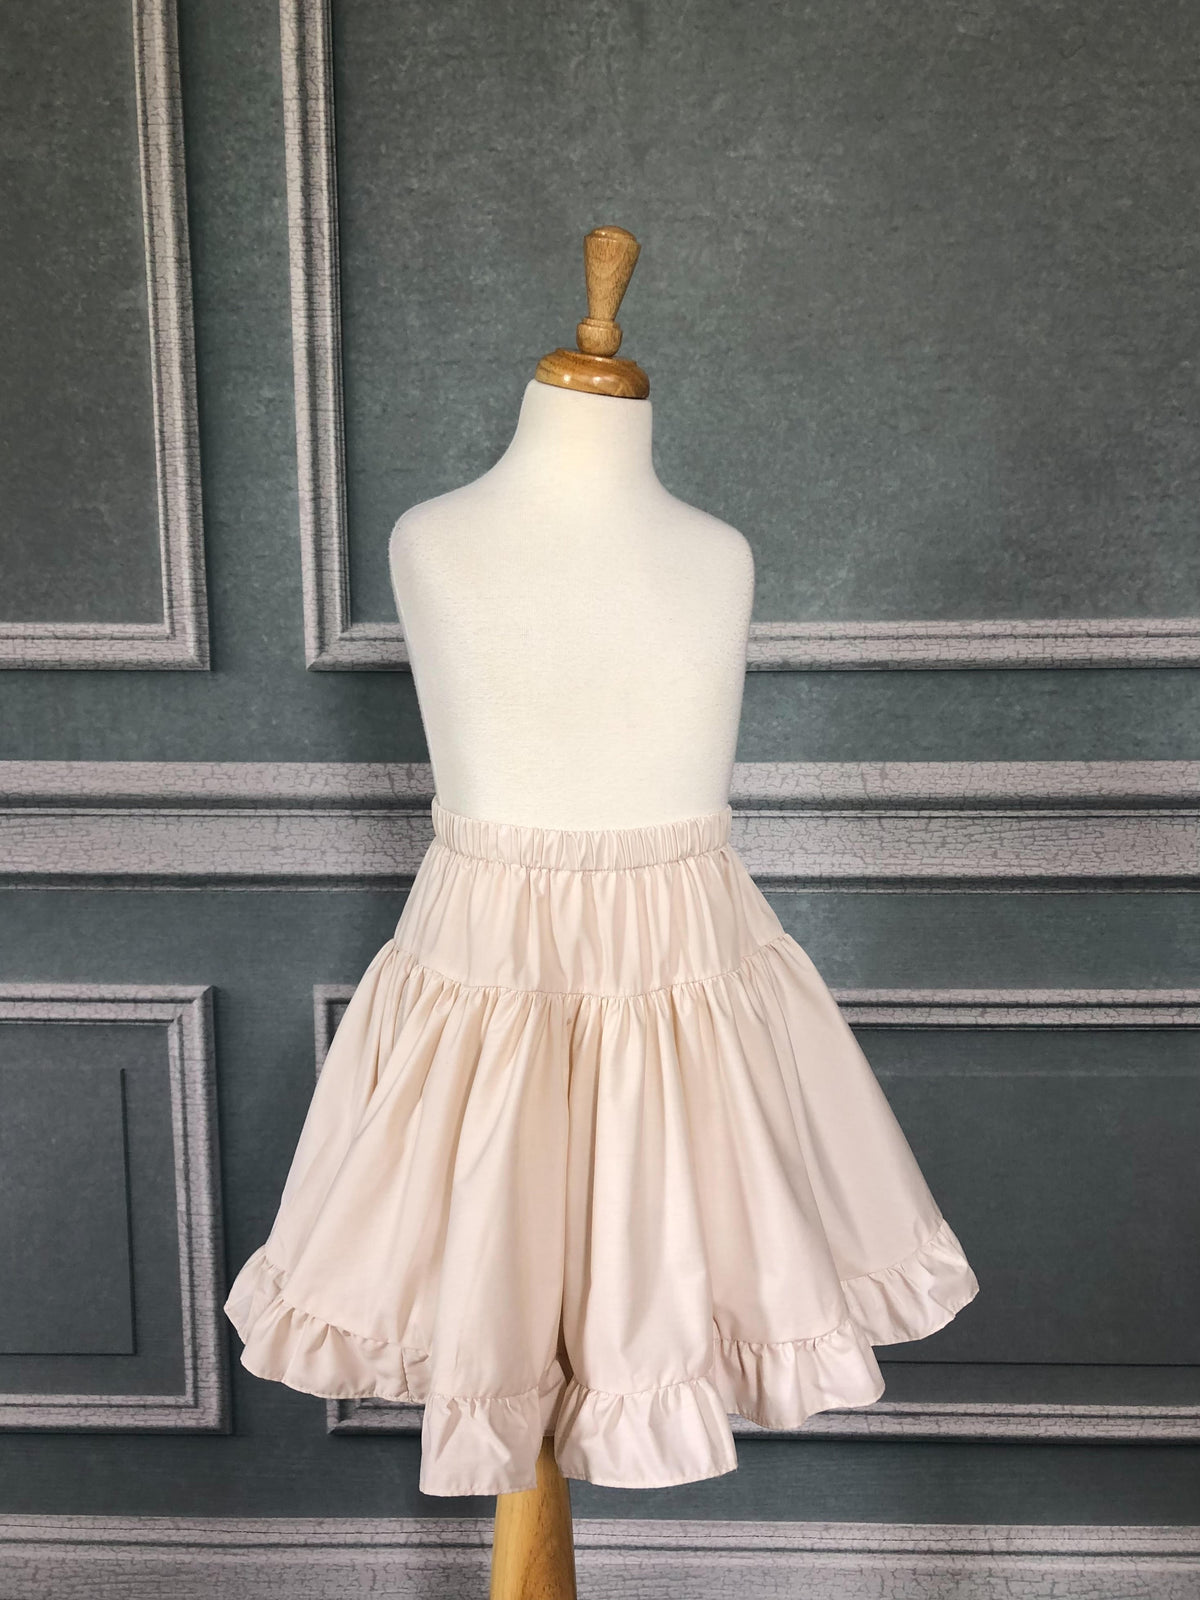 Cotton Pettiskirt with ruffle layers in Antique Ivory